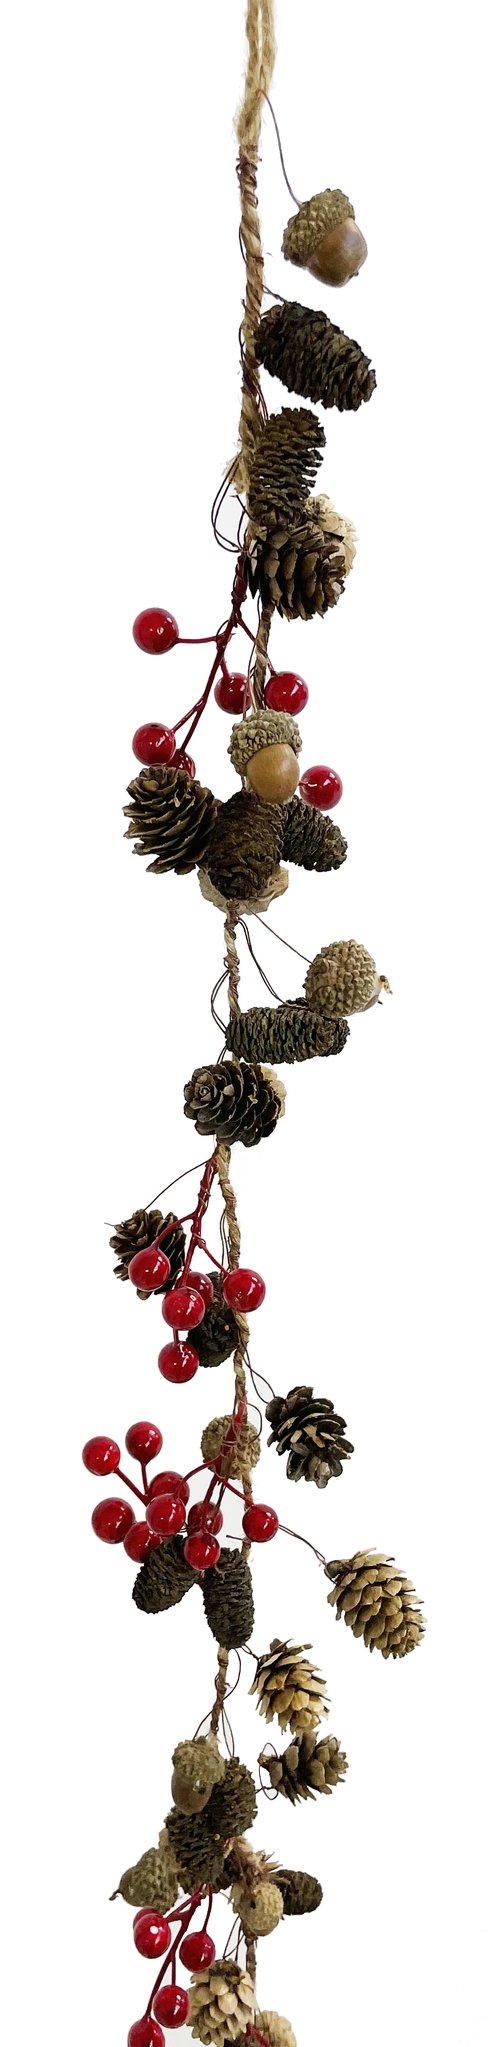 shishi-cone-and-redberry-alnus-garland-natural-180cm